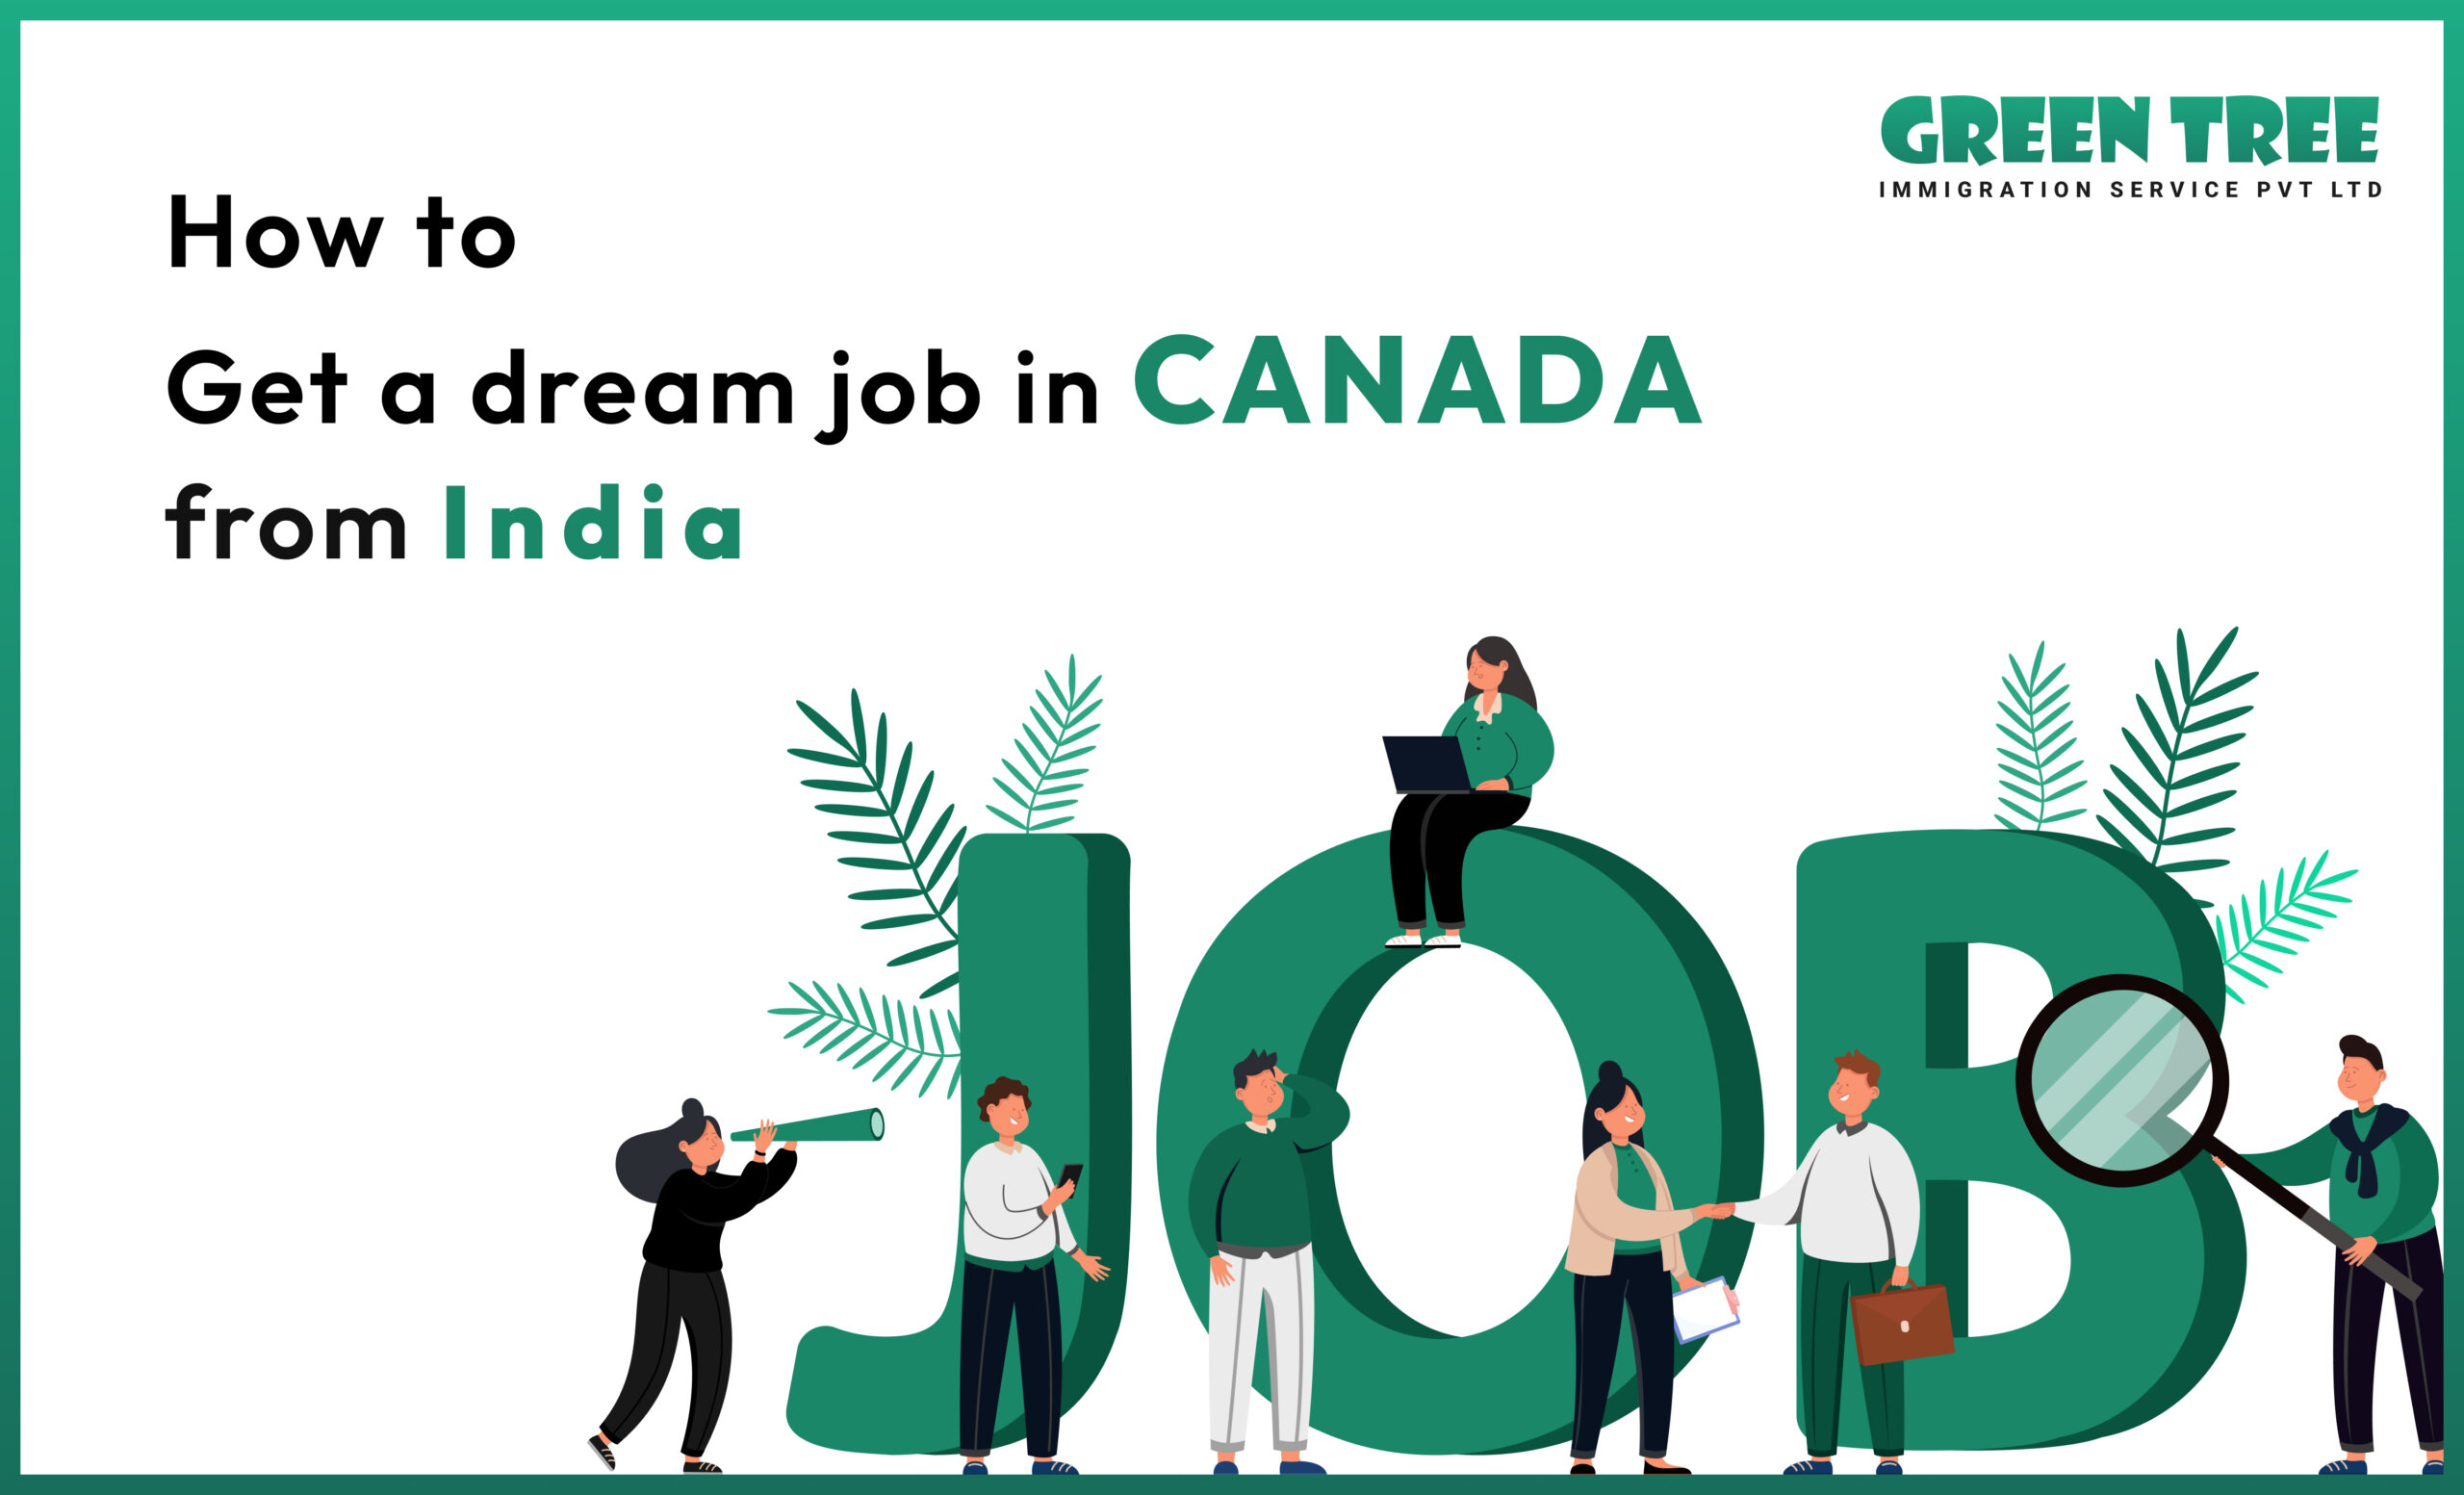 How to Get a dream job in Canada from India